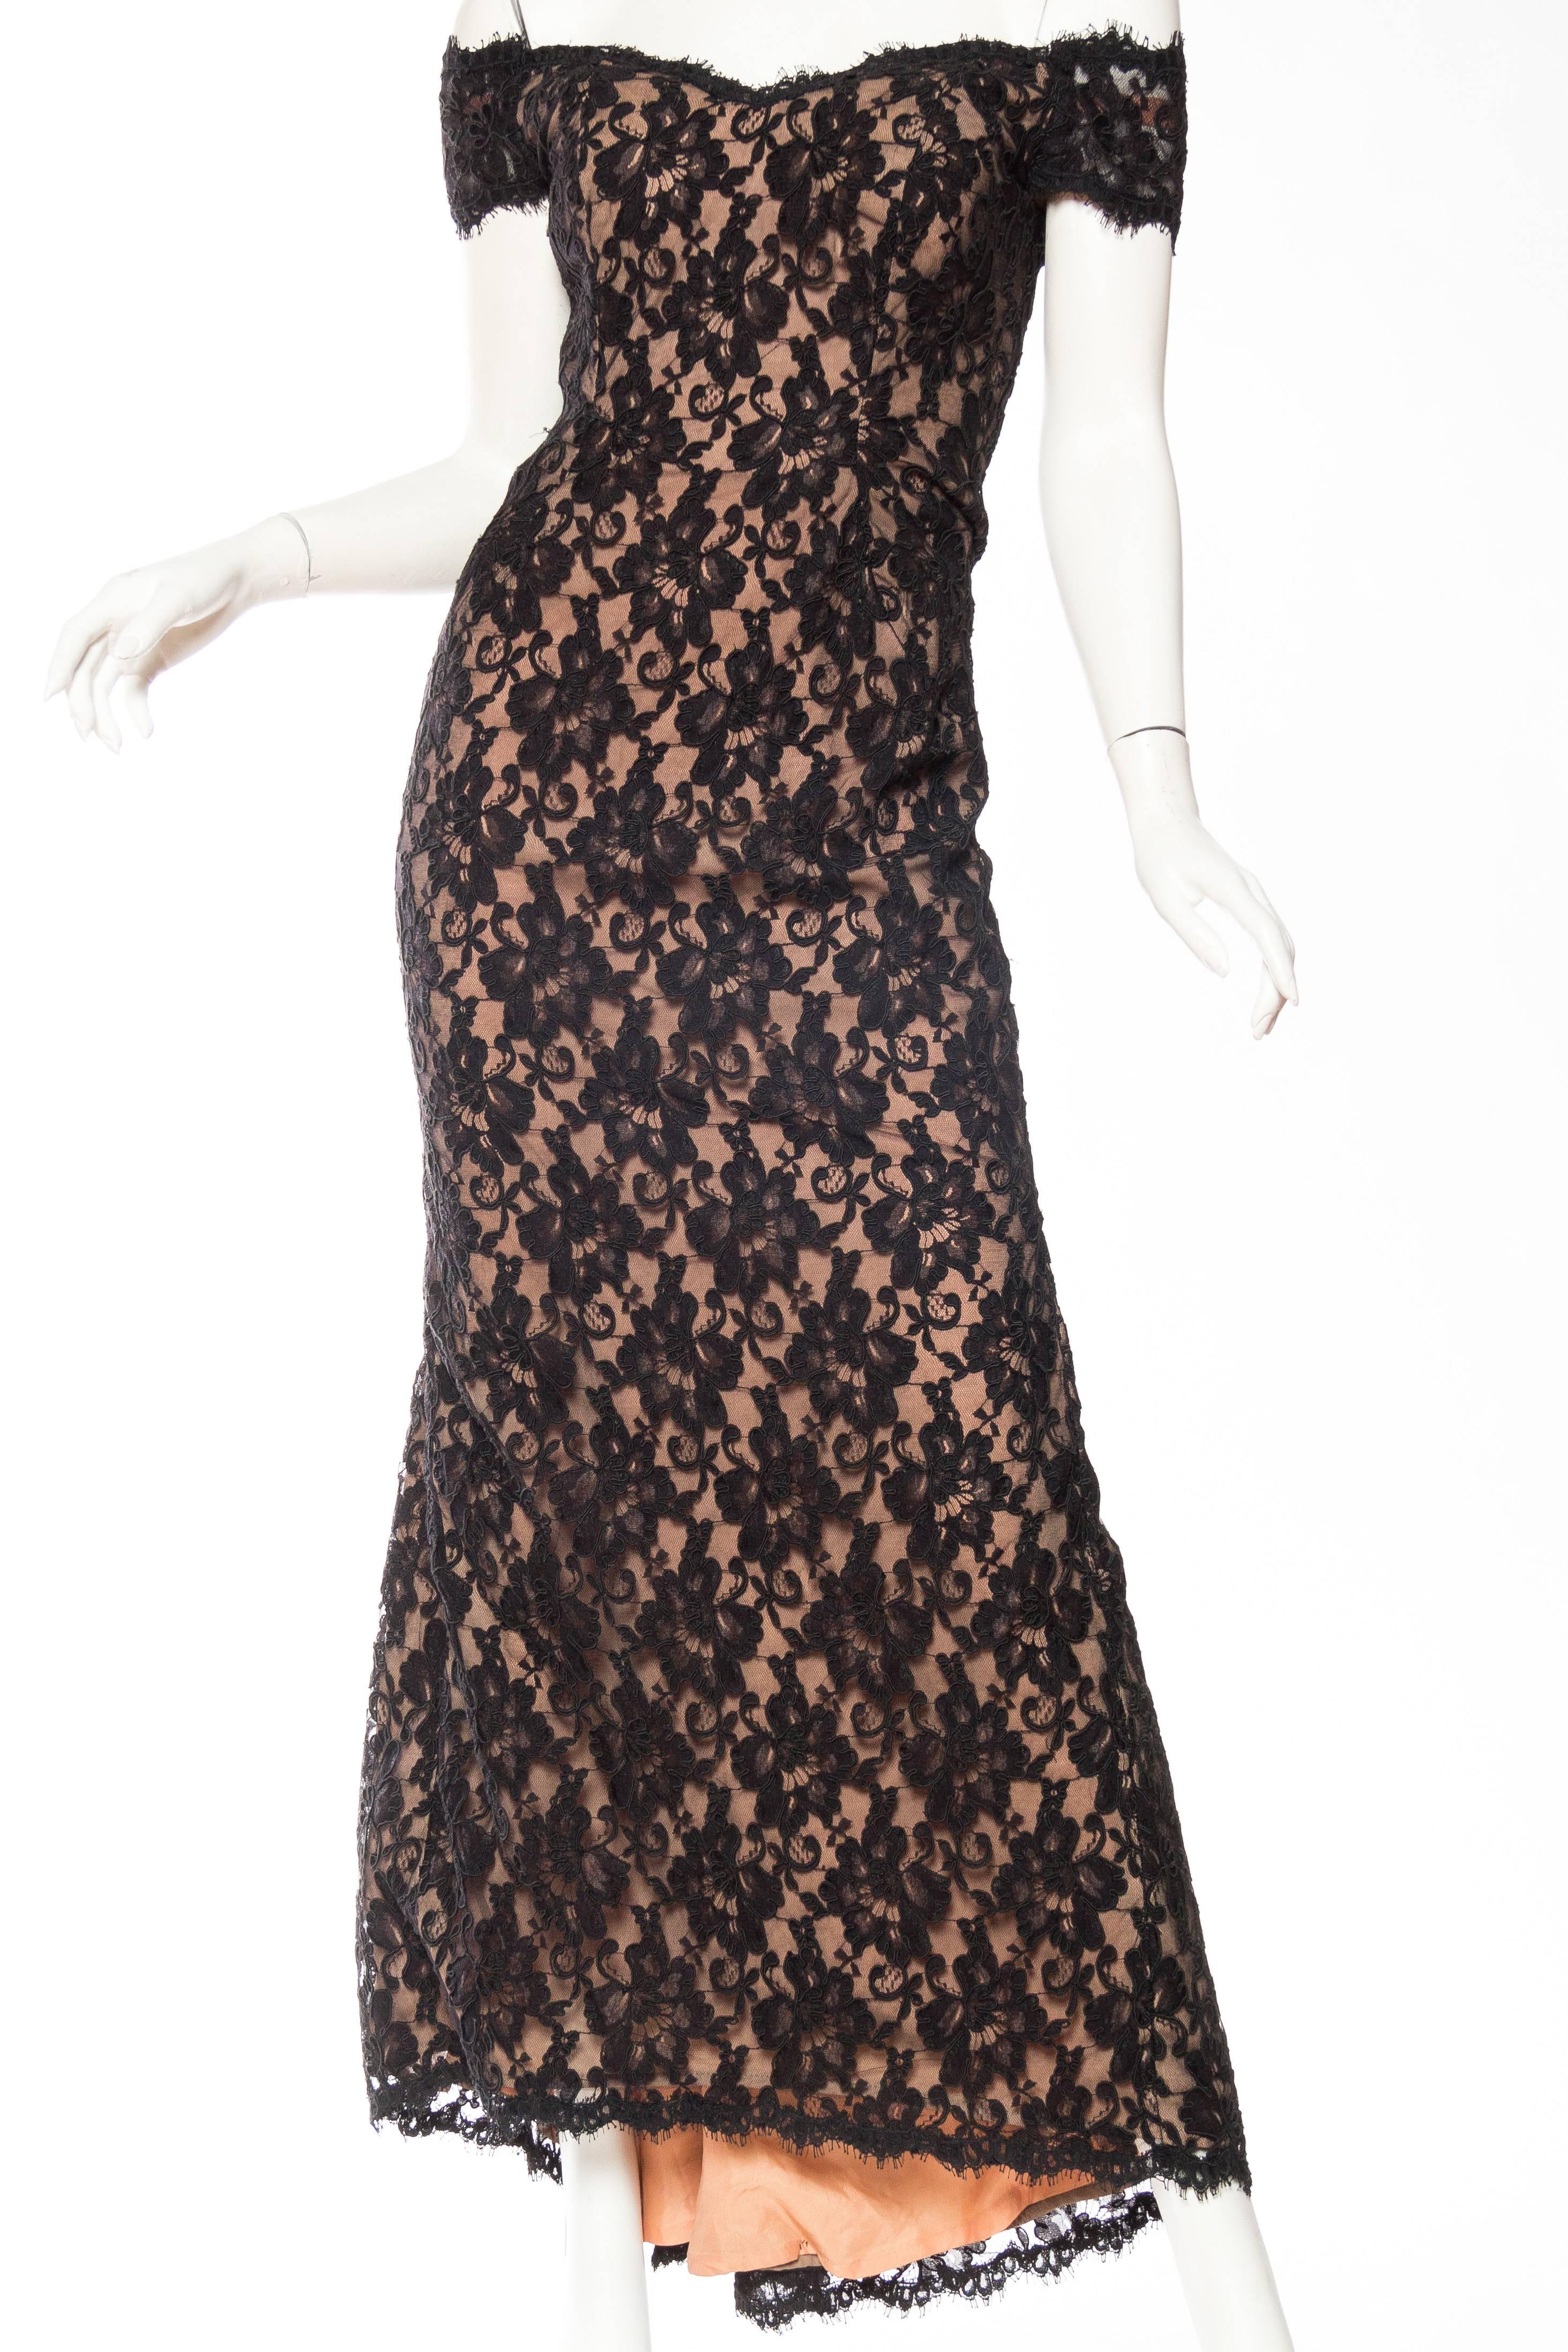 1980S VICTOR COSTA FOR I. MAGNIN Black Poly/Rayon Lace Off The Shoulder Gown With Slight Train